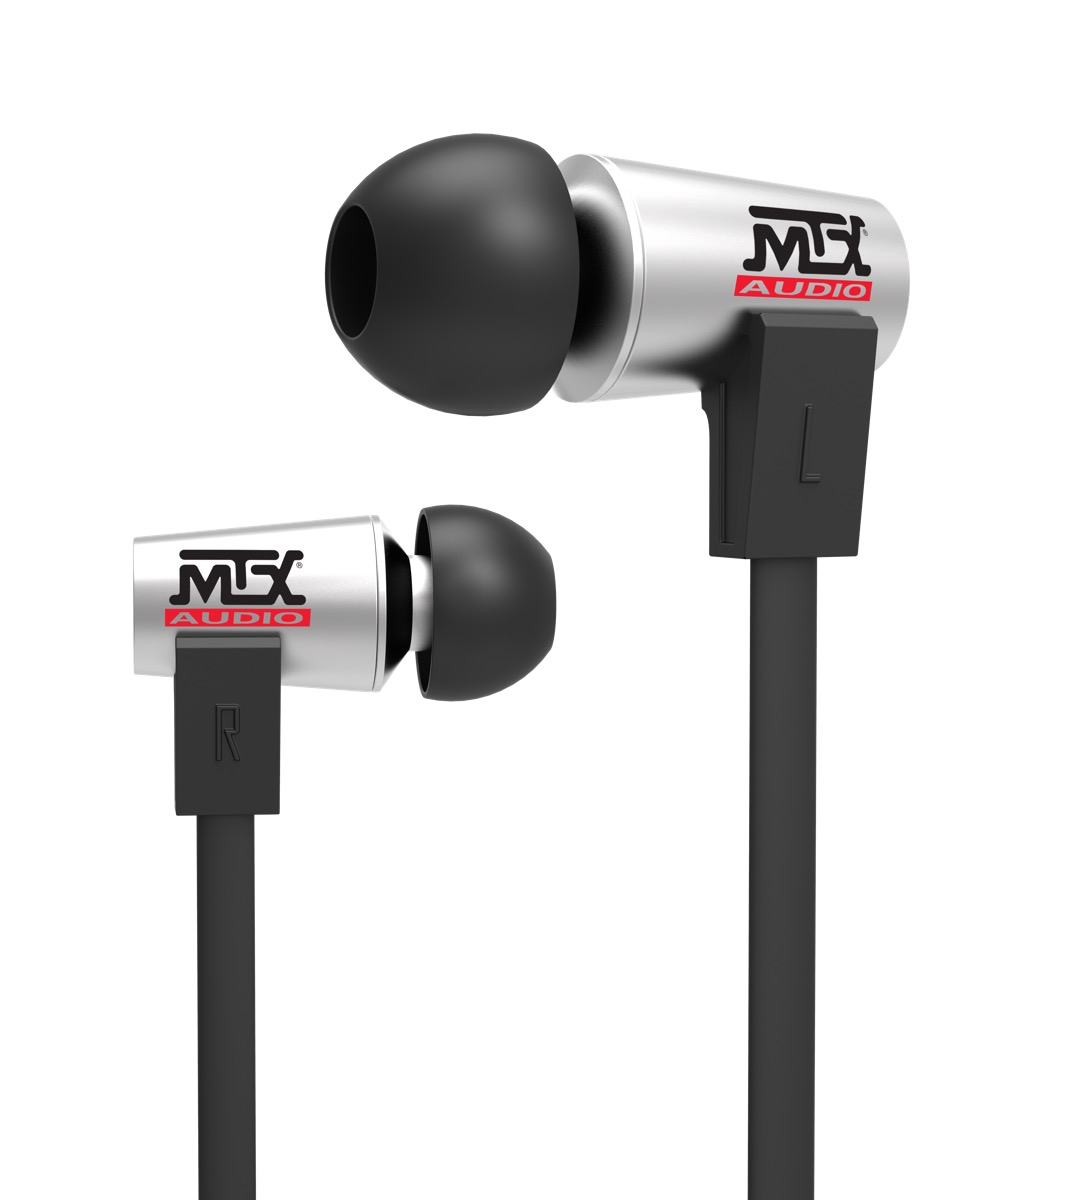 MTX iX4 product page